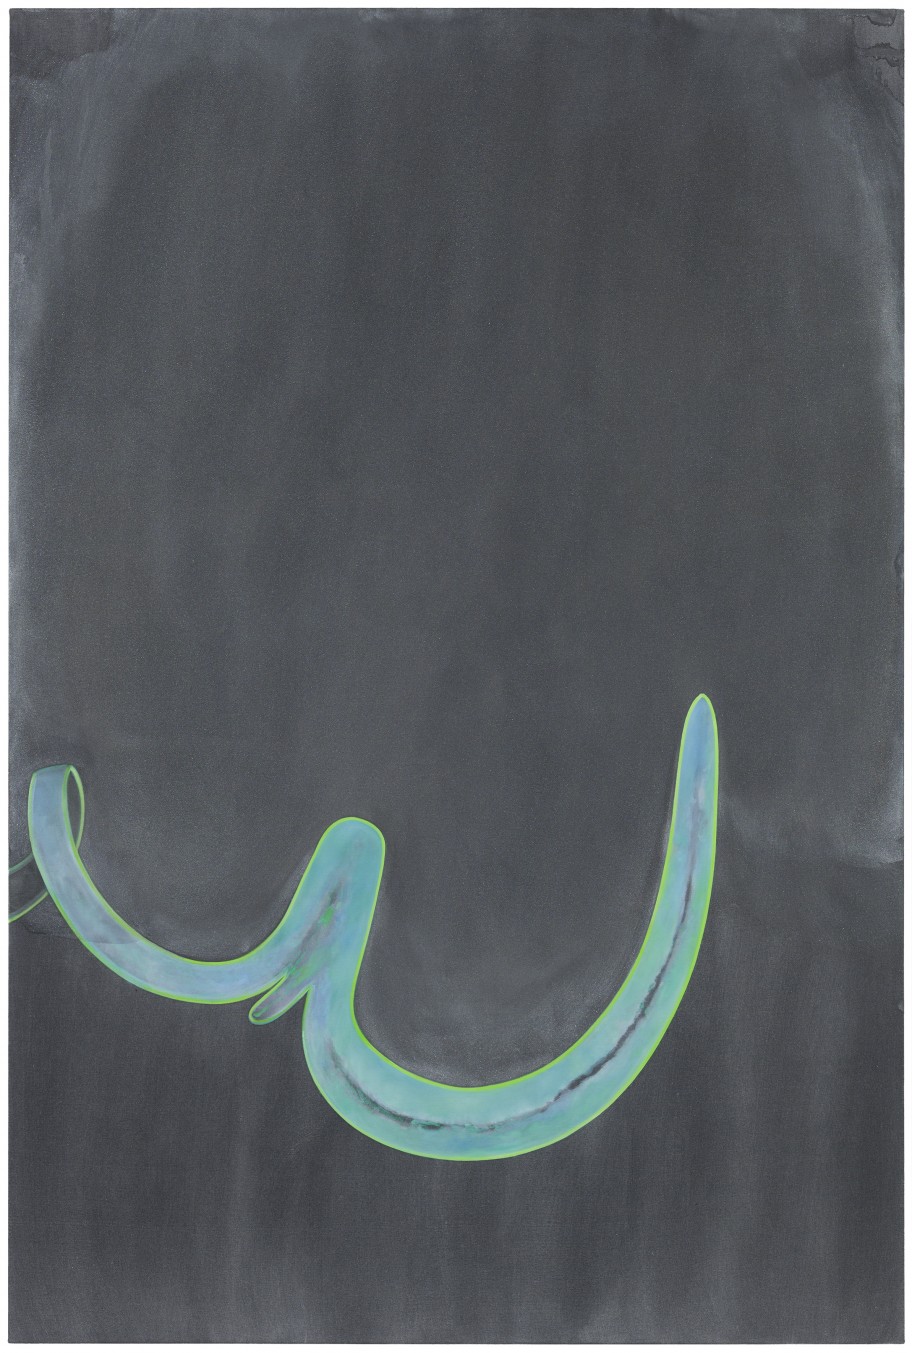 Milena Dragicevic From the Pampero Series (Lilo), 2014oil, acrylic on black fabric 179 x 120 cm 